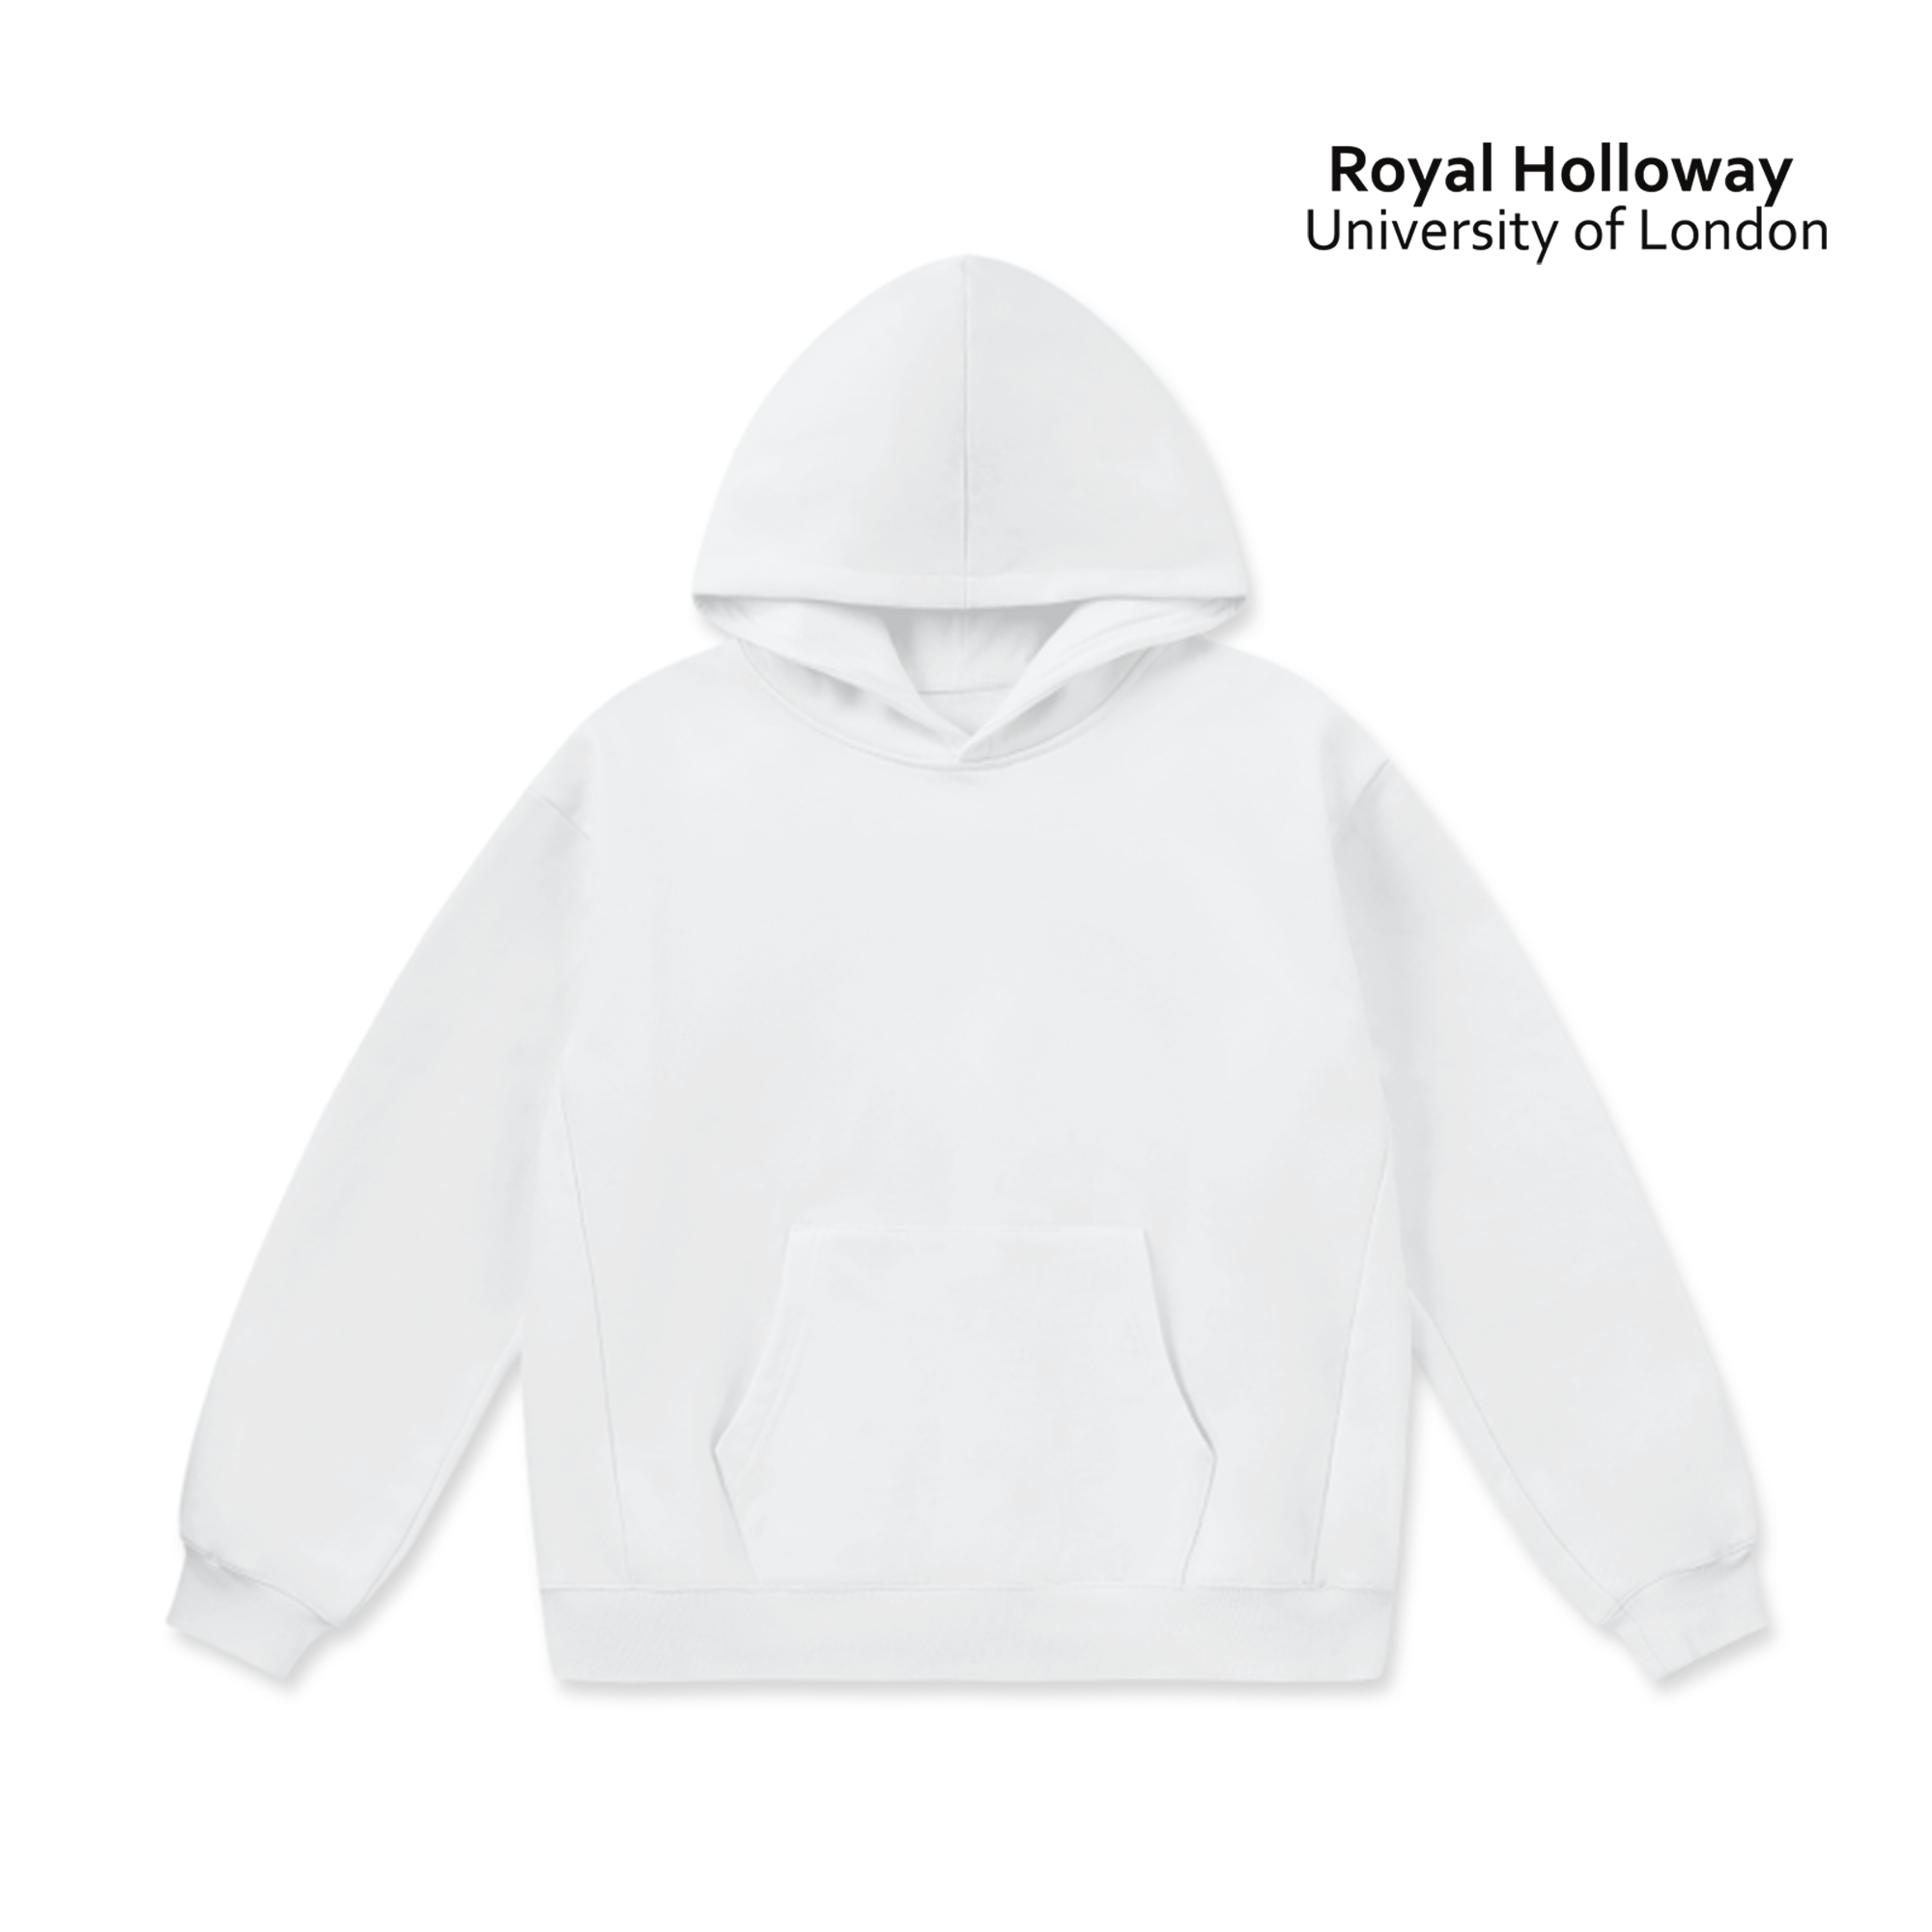 LCC Super Weighted Hoodie - Royal Holloway University of London (Modern)